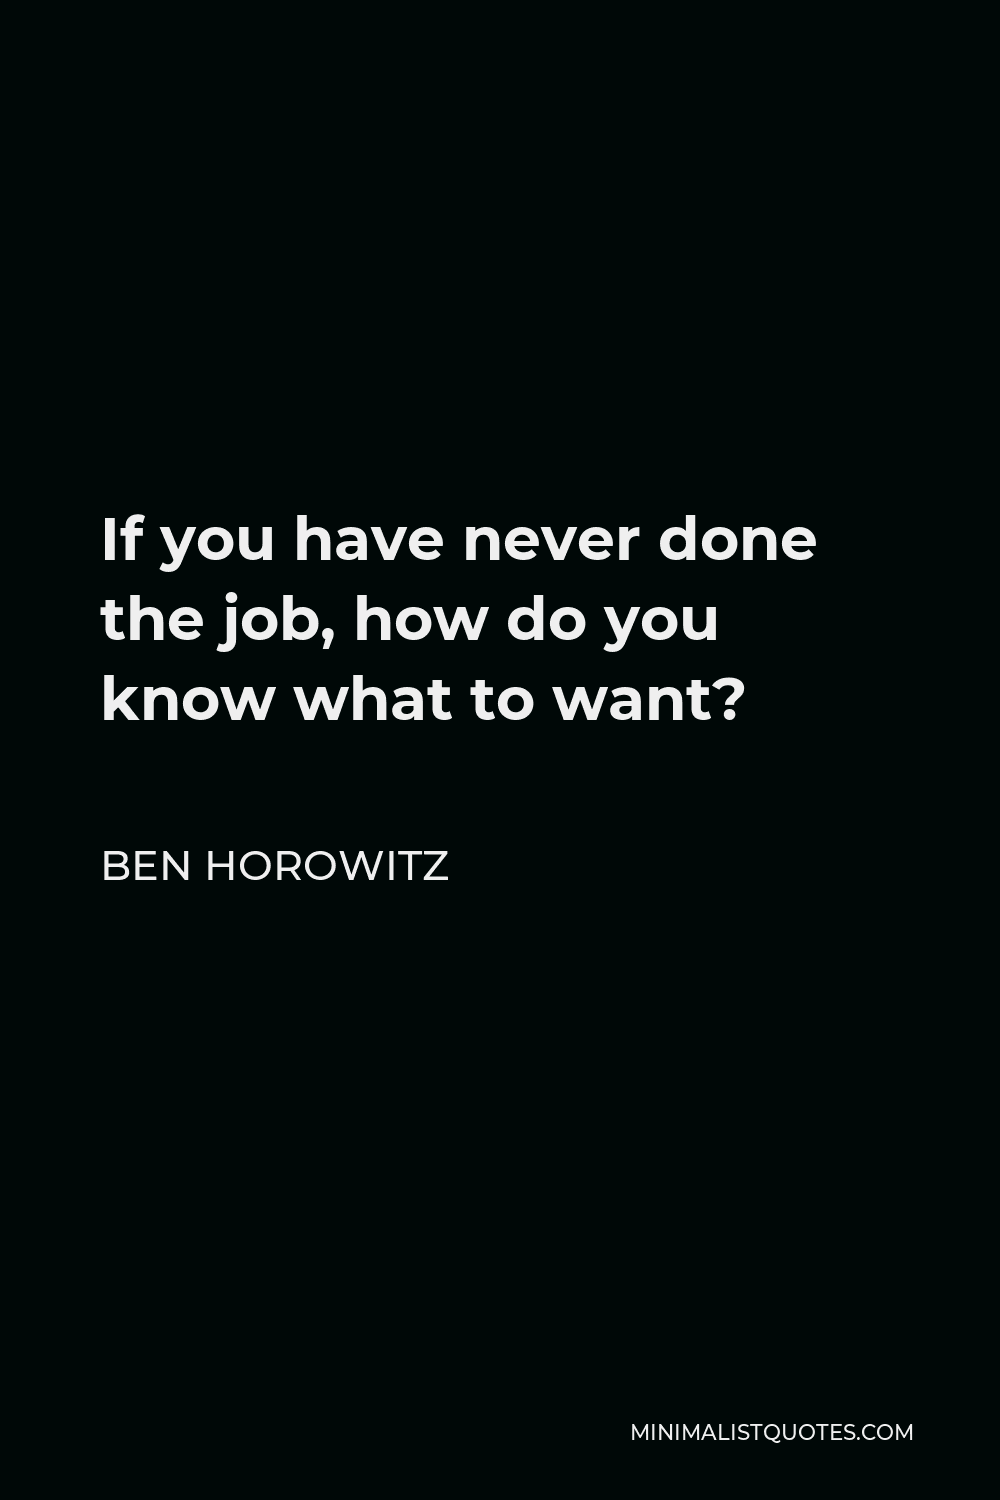 ben-horowitz-quote-if-you-have-never-done-the-job-how-do-you-know